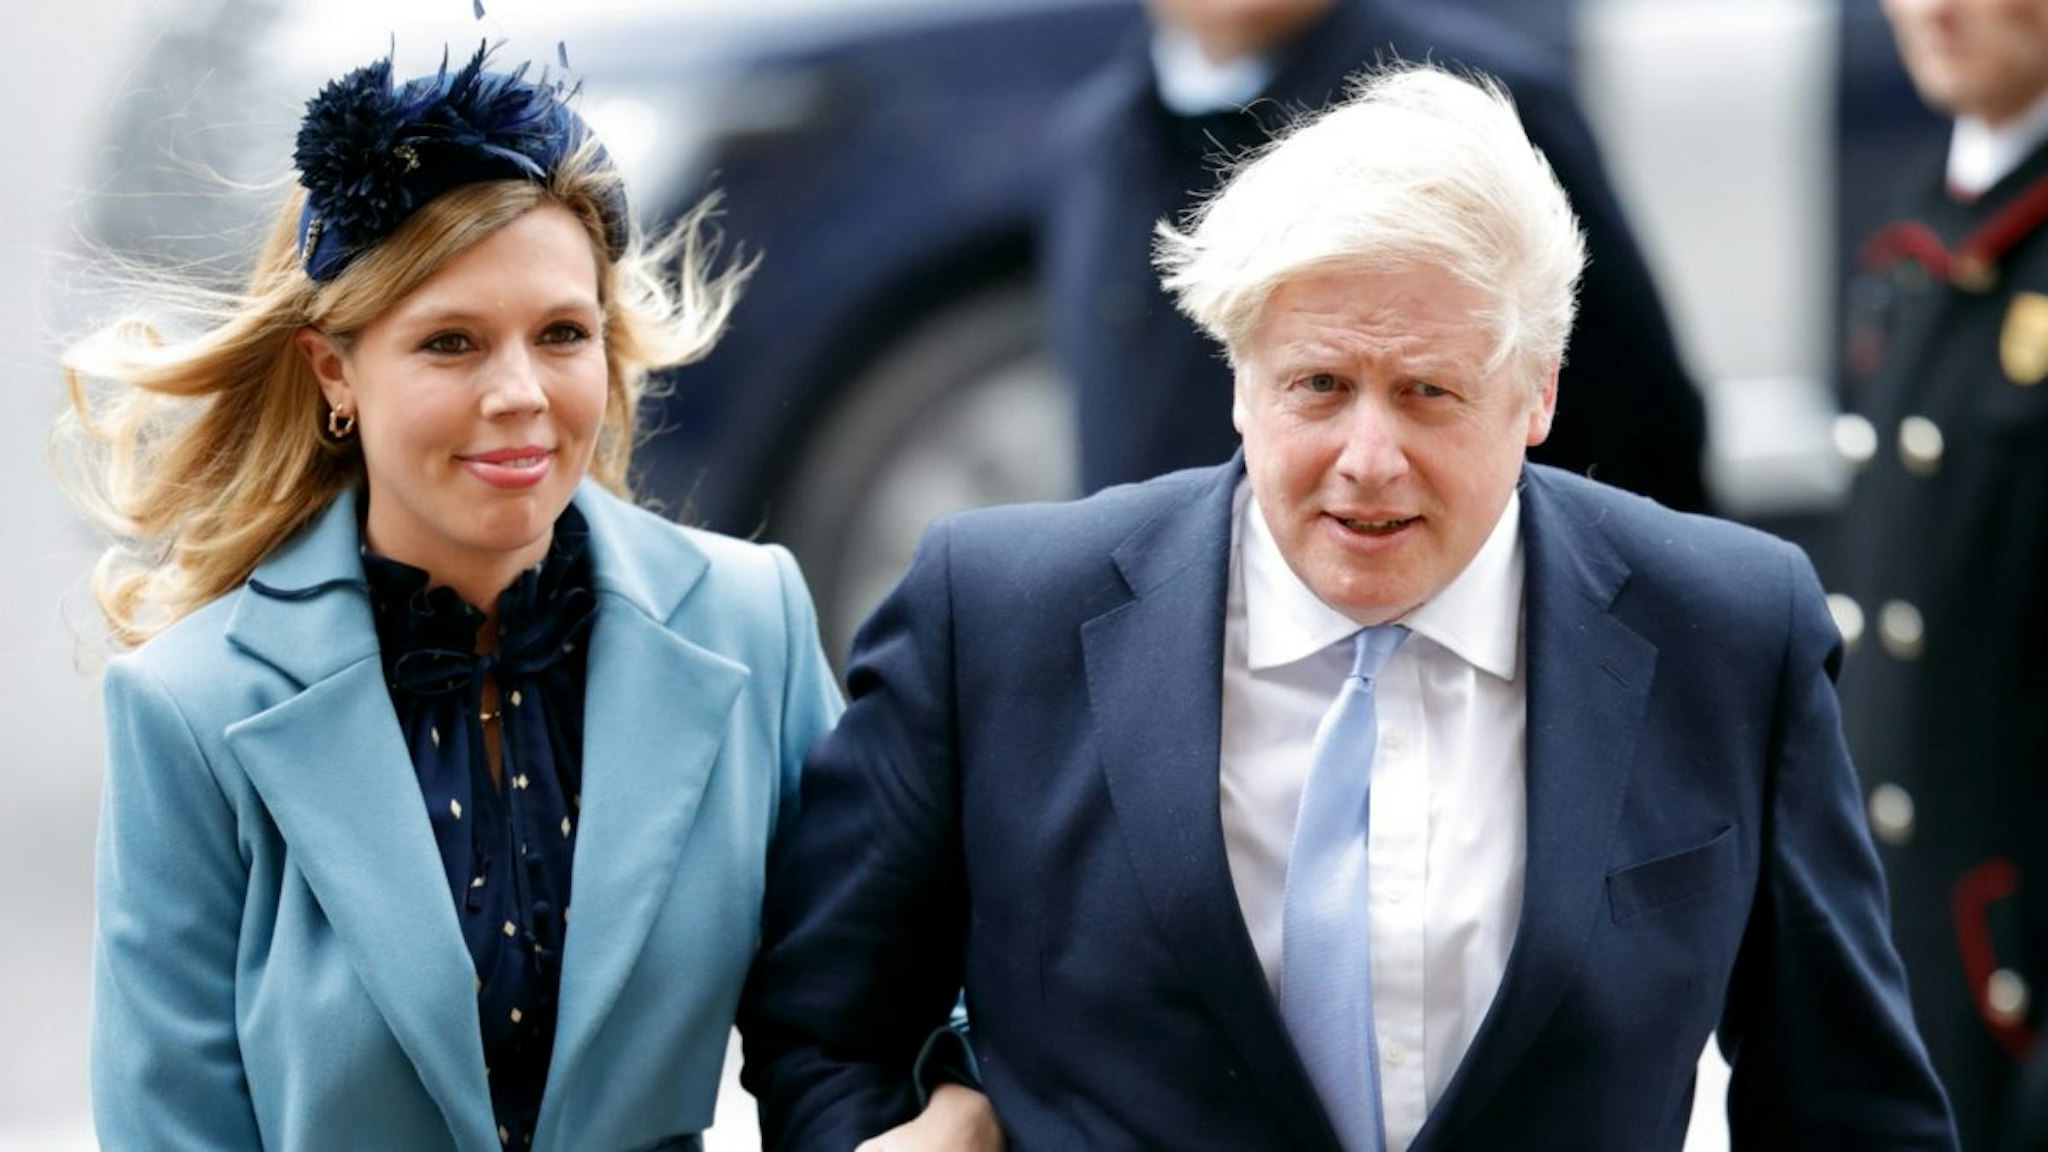 Carrie Symonds and Prime Minister Boris Johnson attend the Commonwealth Day Service 2020 at Westminster Abbey on March 9, 2020 in London, England.